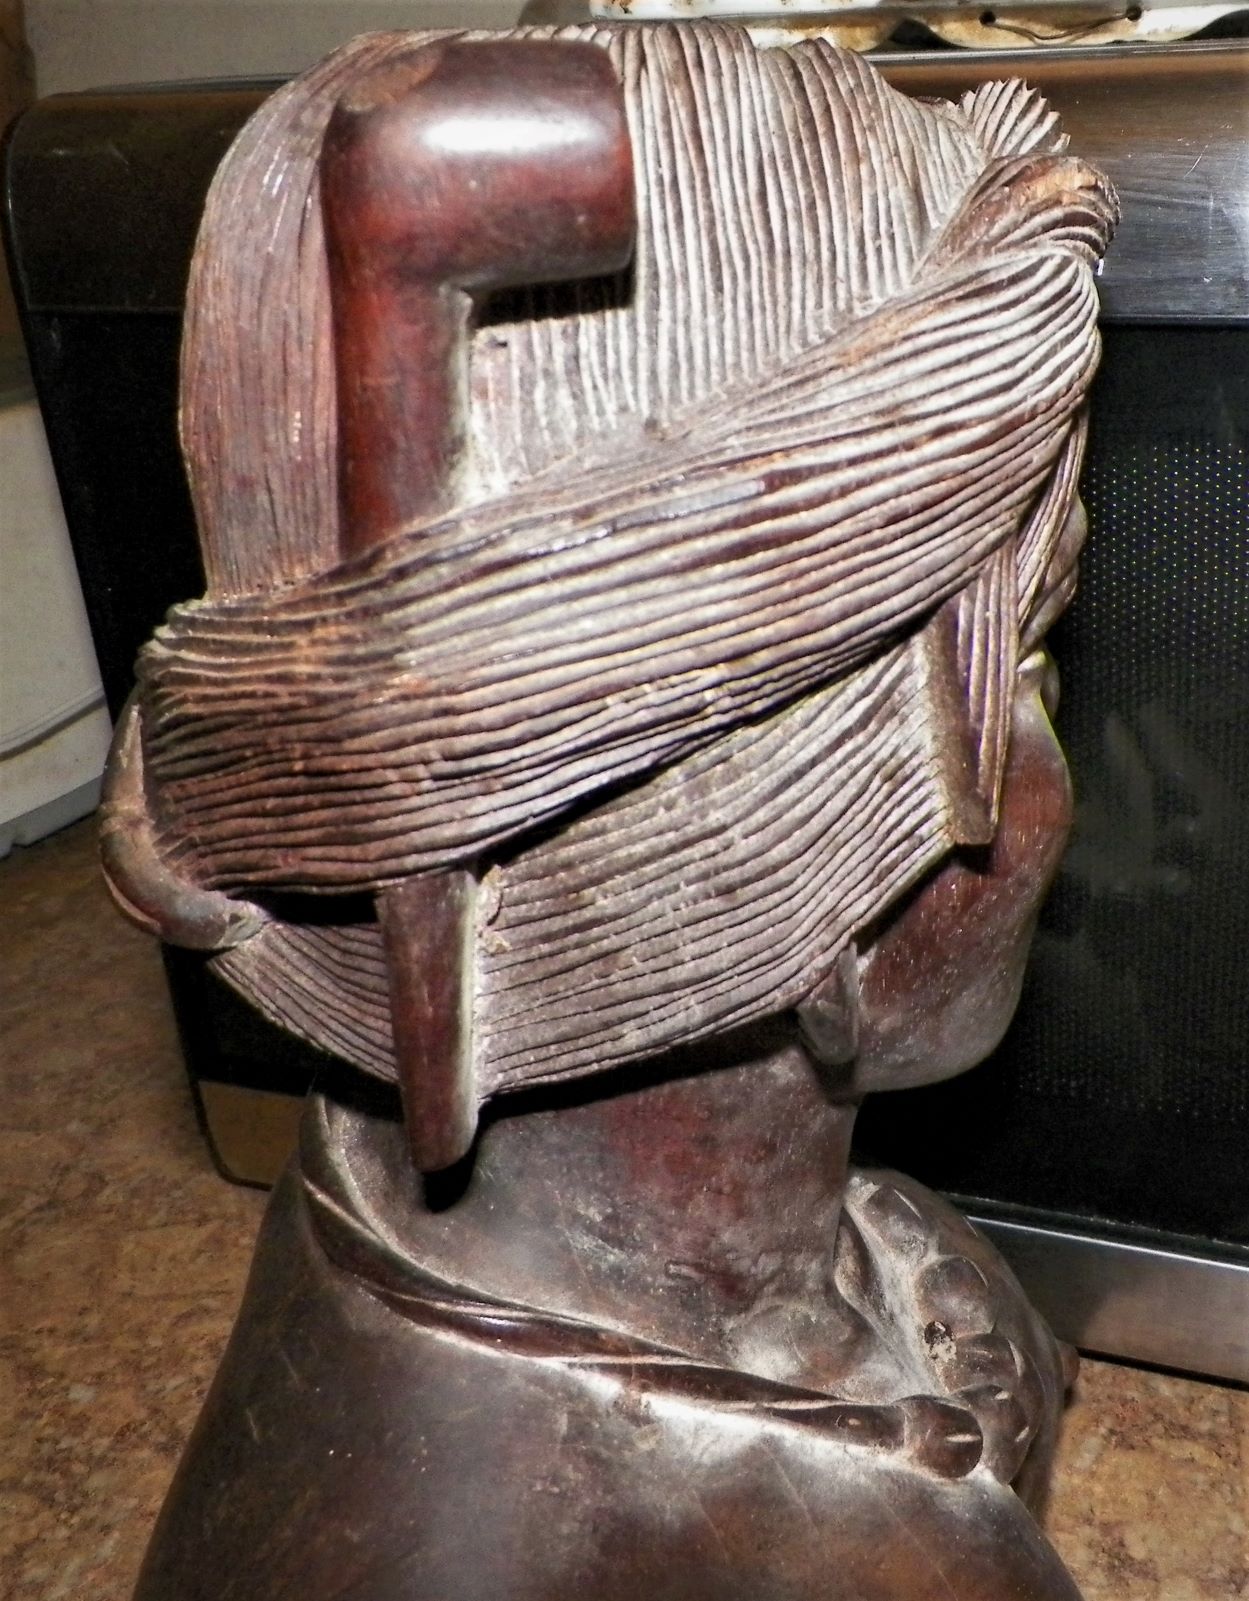 ART STATUE INDIAN WITH PIPE IN HAIR 3AAz.jpg